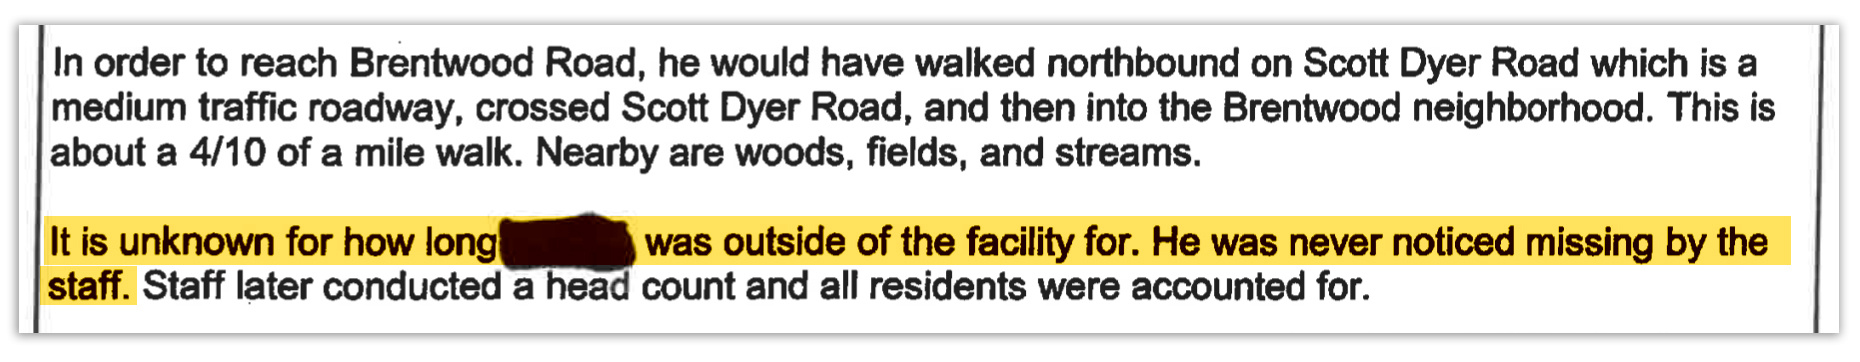 A portion of an incident report. The reporting newsrooms want readers to focus on a specific sentence in the report and highlighted that sentence in the photo. That sentence reads "It is unknown for how long name redacted was outside of the facility for. He was never noticed missing by staff.